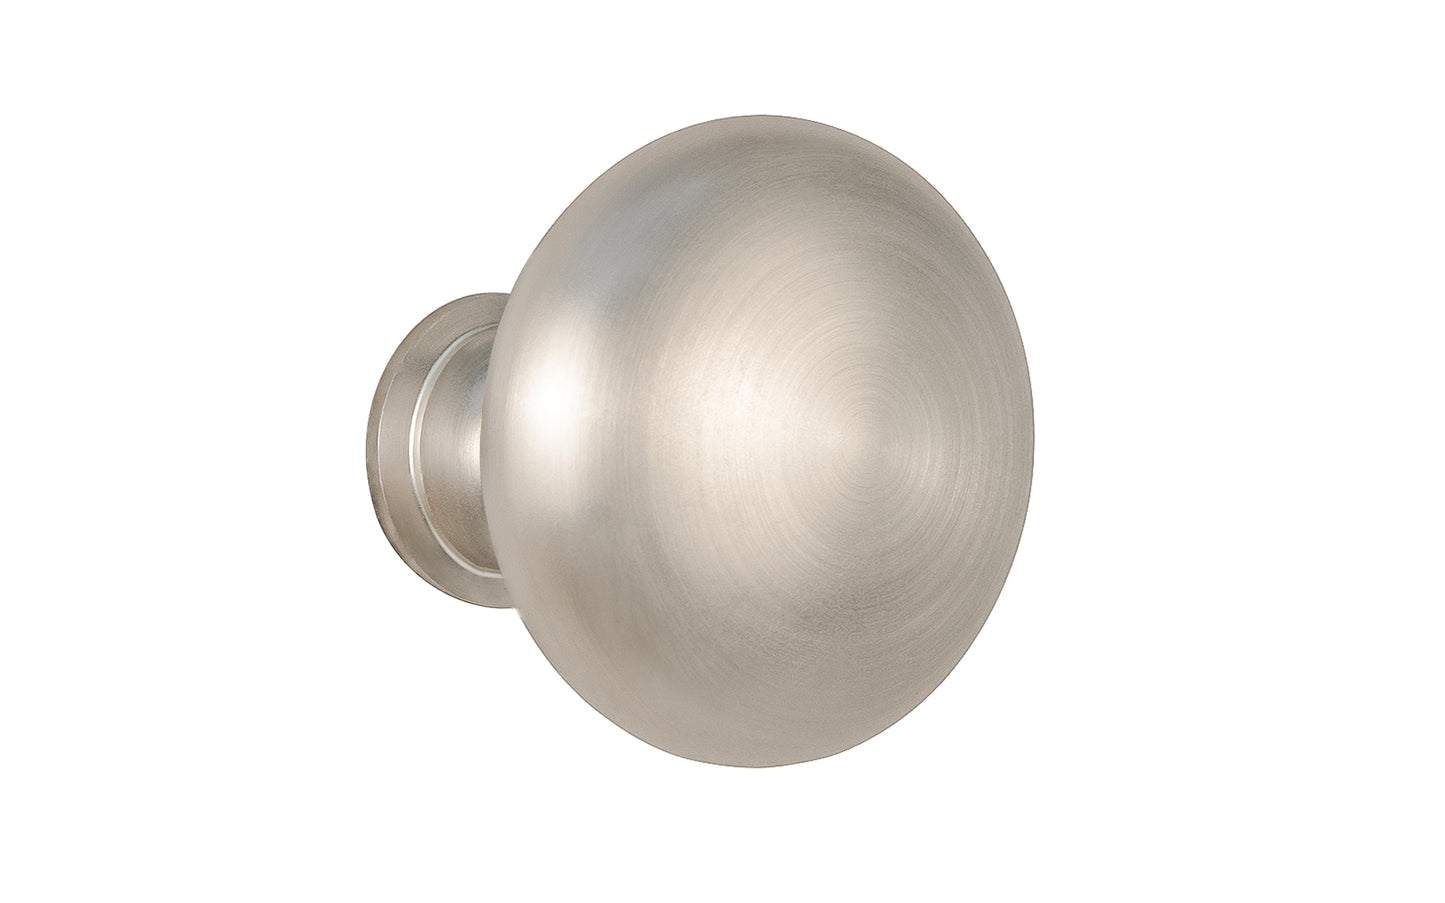 Vintage-style Hardware · Traditional & Classic Brass Knob with a Brushed Nickel Finish. 1-1/2" diameter size knob. Made of high quality brass, this stylish round cabinet knob has a smooth look & feel on a pedestal shaped base. Works great in kitchens, bathrooms, on furniture, cabinets, drawers. Authentic reproduction hardware.